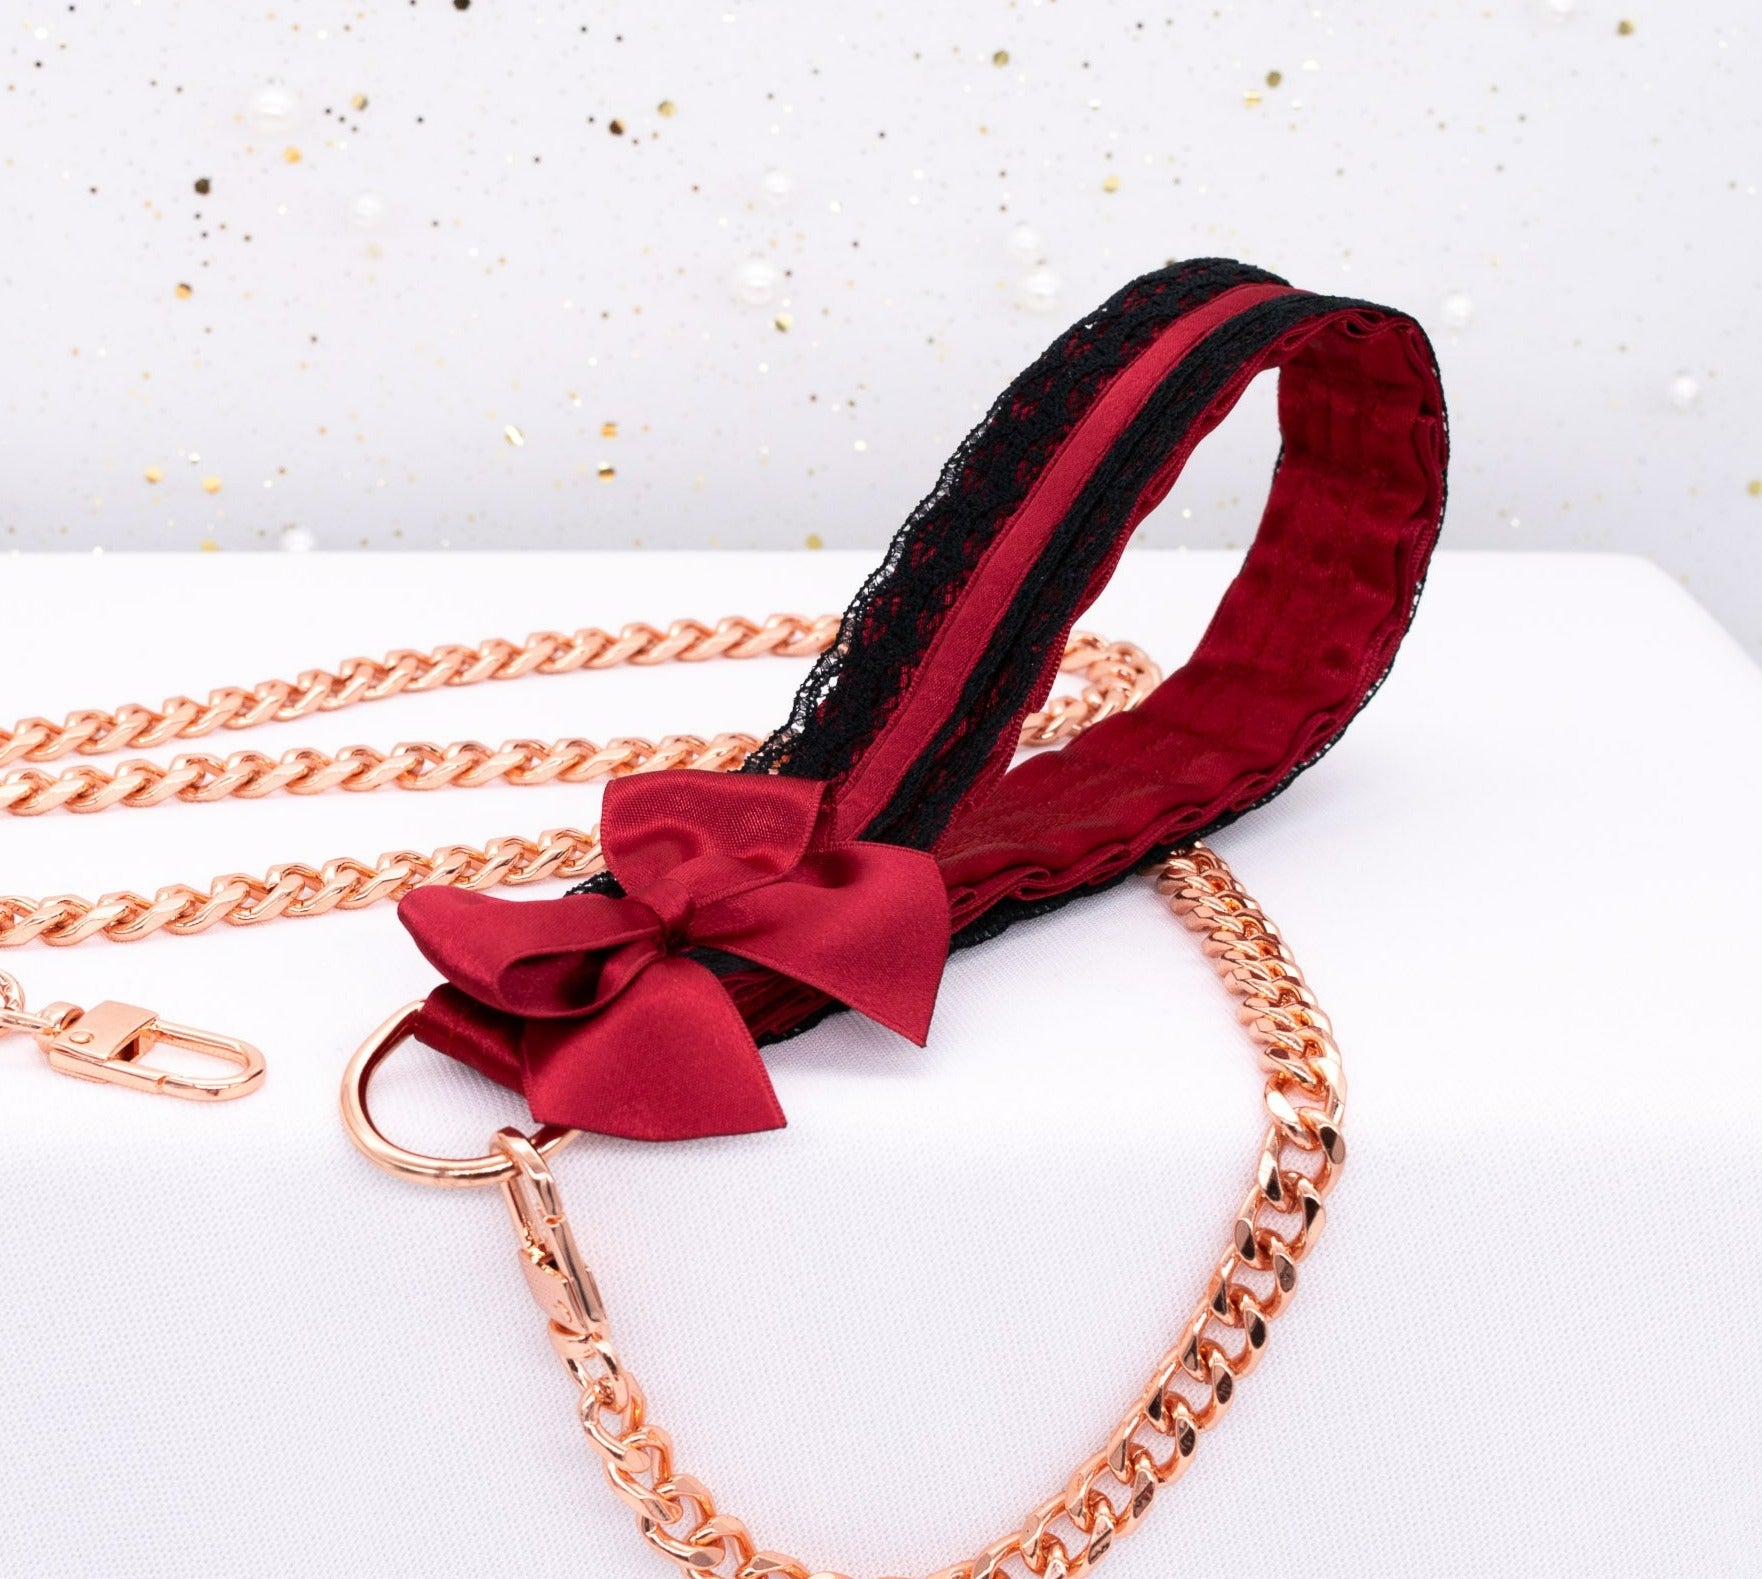 Crimson and Black Lace Luxury BDSM Leash in Rose Gold